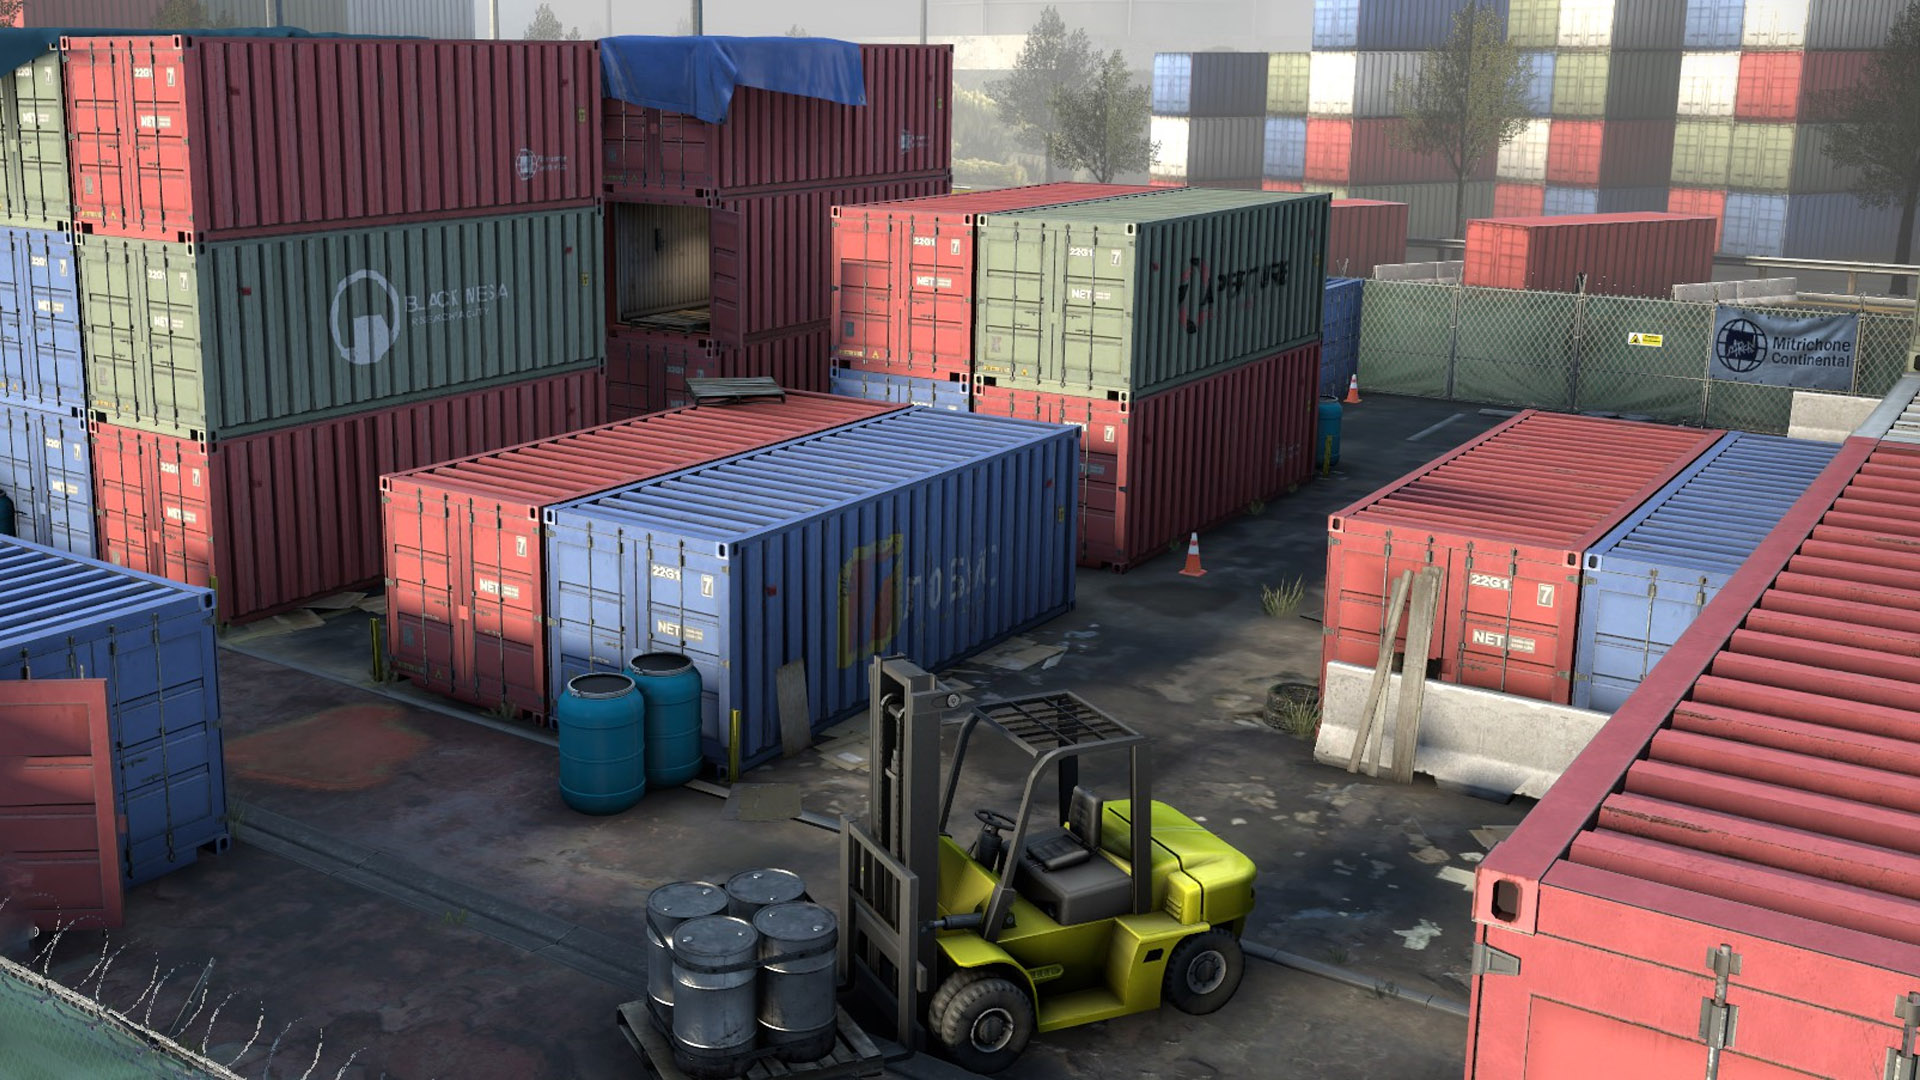 Modern Warfare’s Shipment 24/7 returns, but this time in CSGO